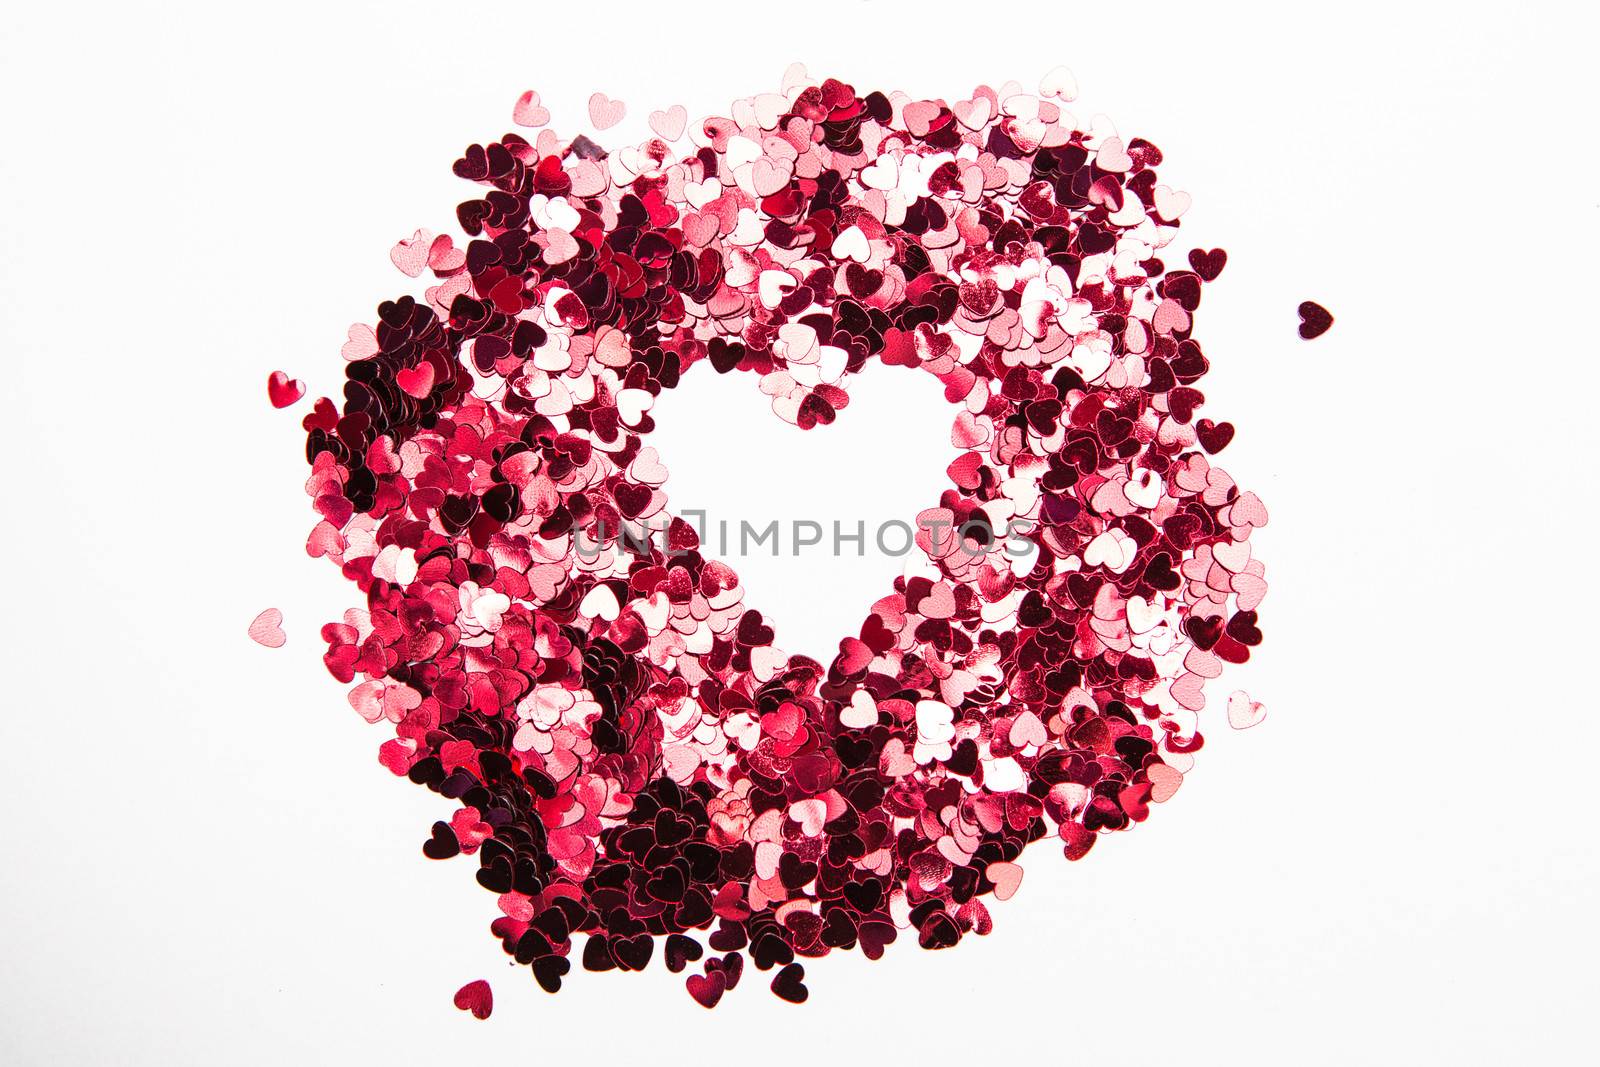 Pink heart confetti in inverted heart shape on white background